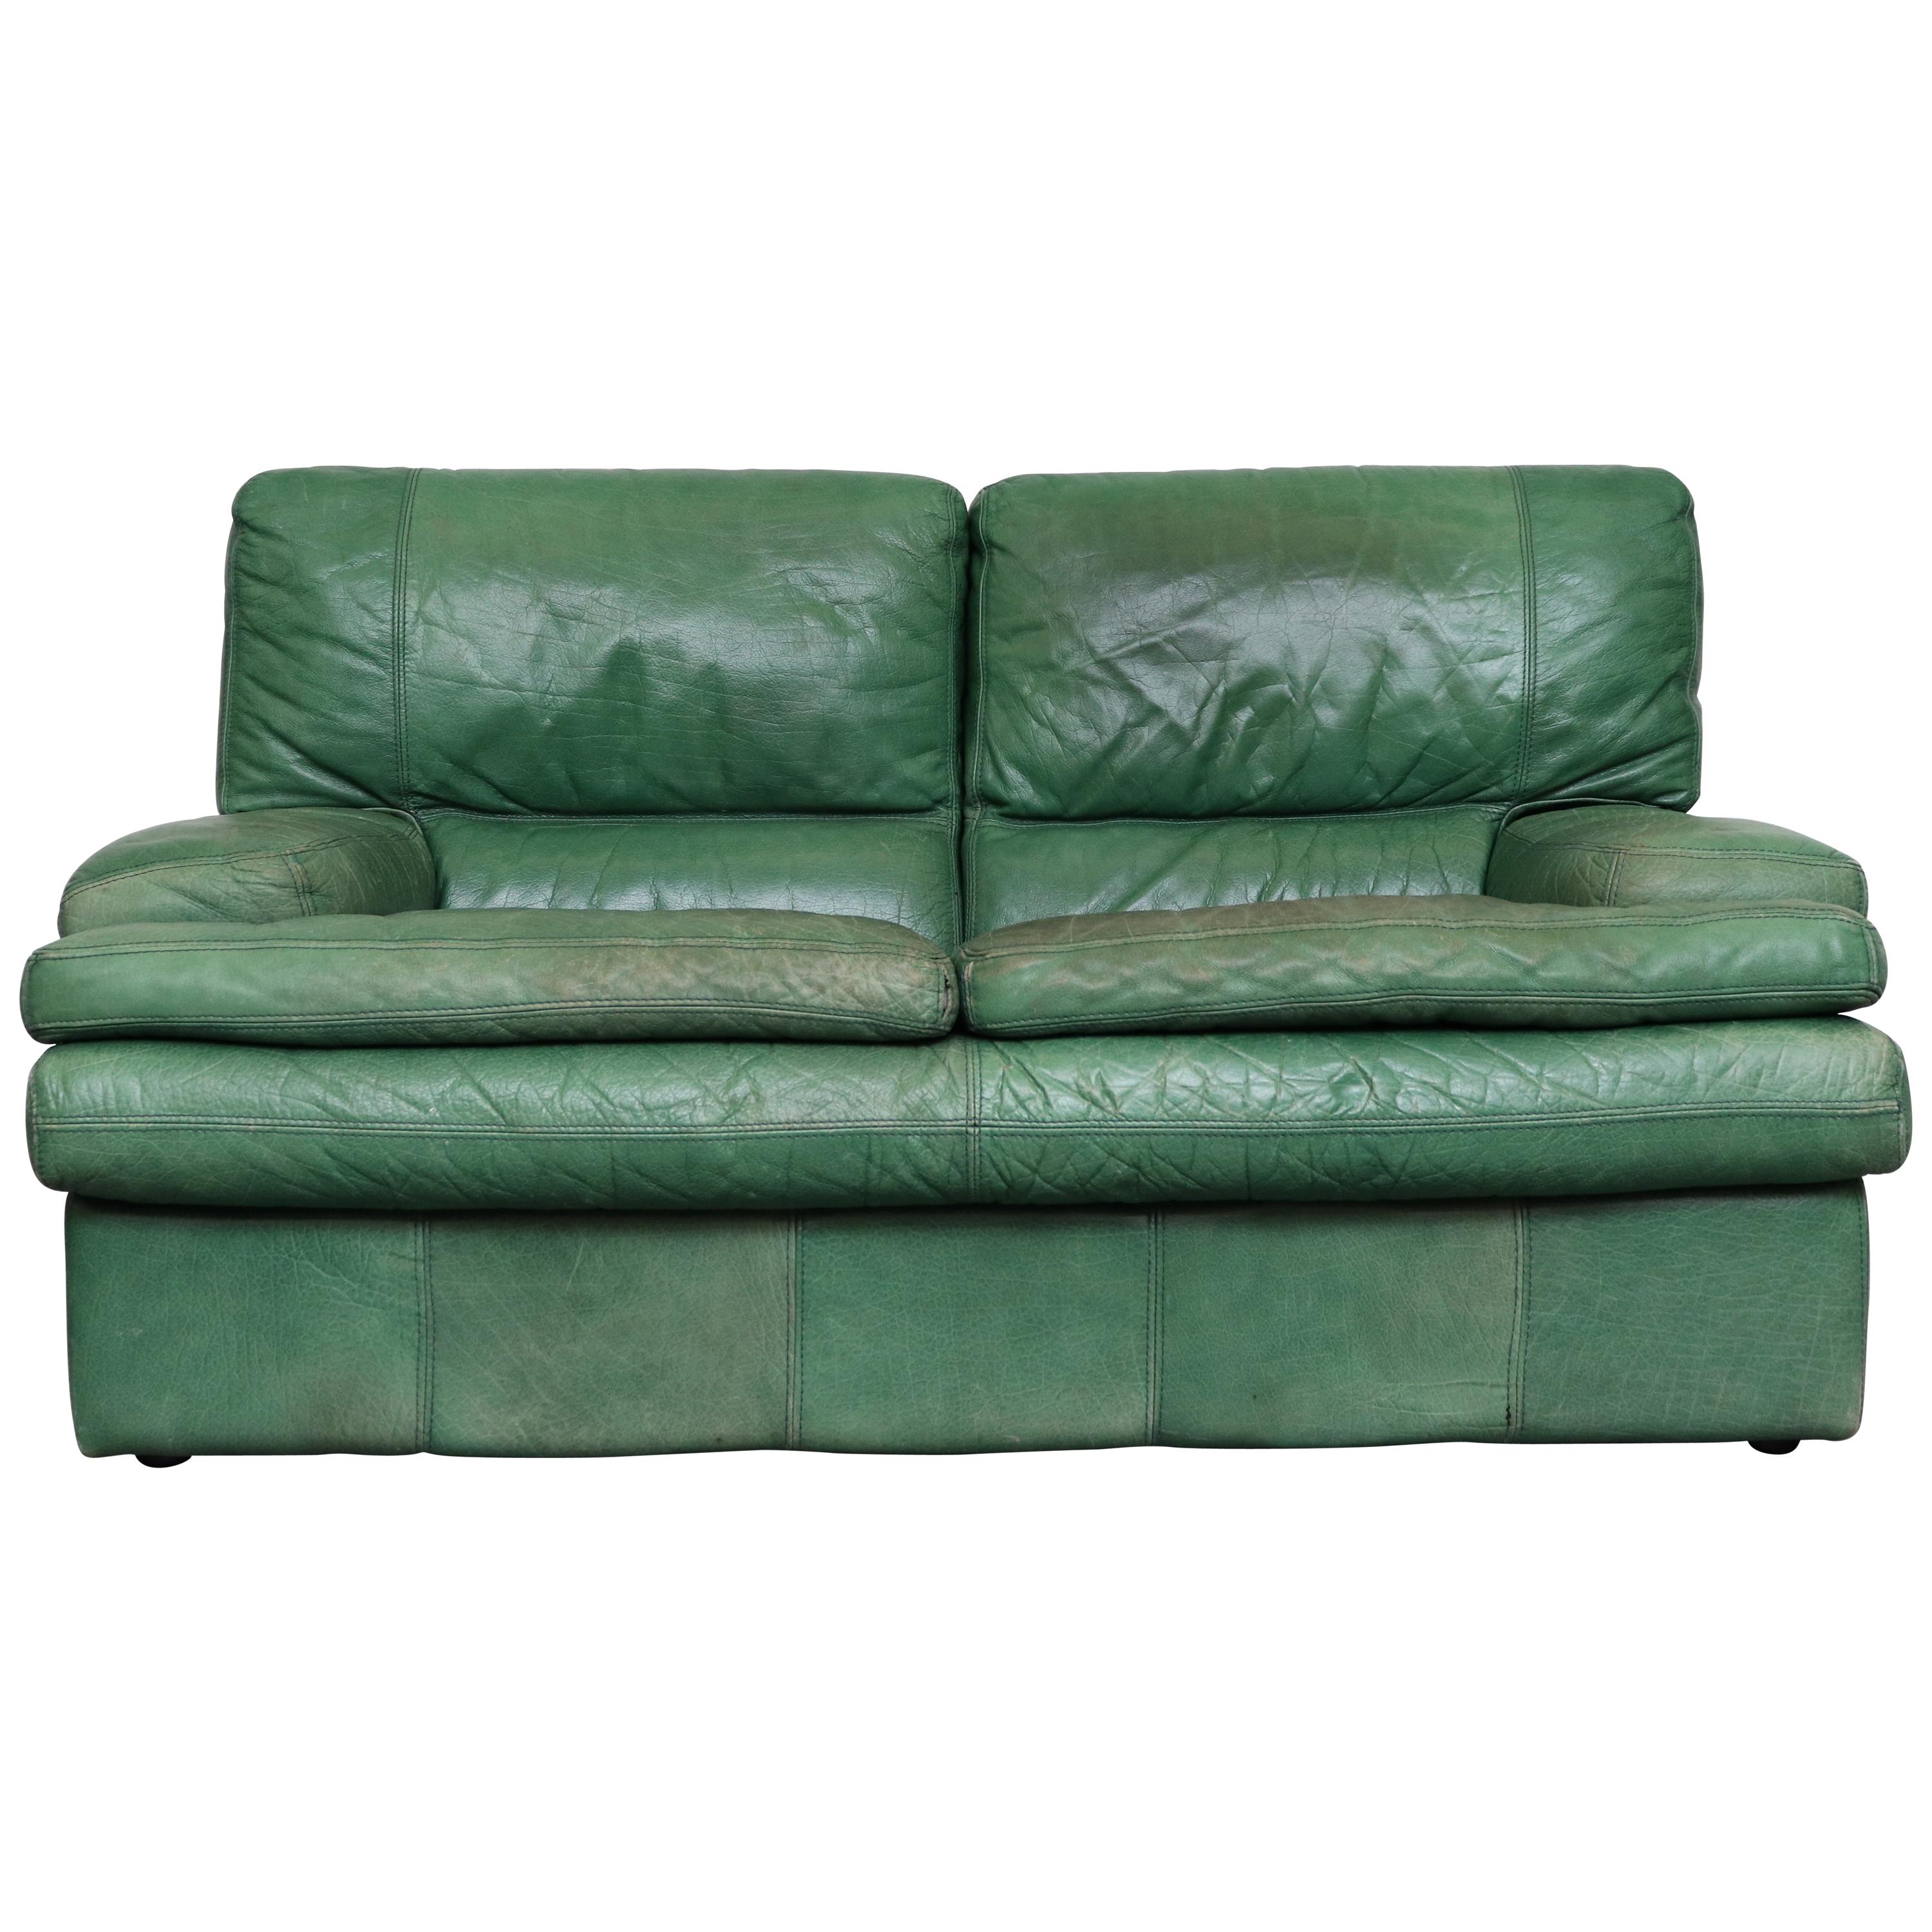 Kelly Green Leather Love Seat Sofa